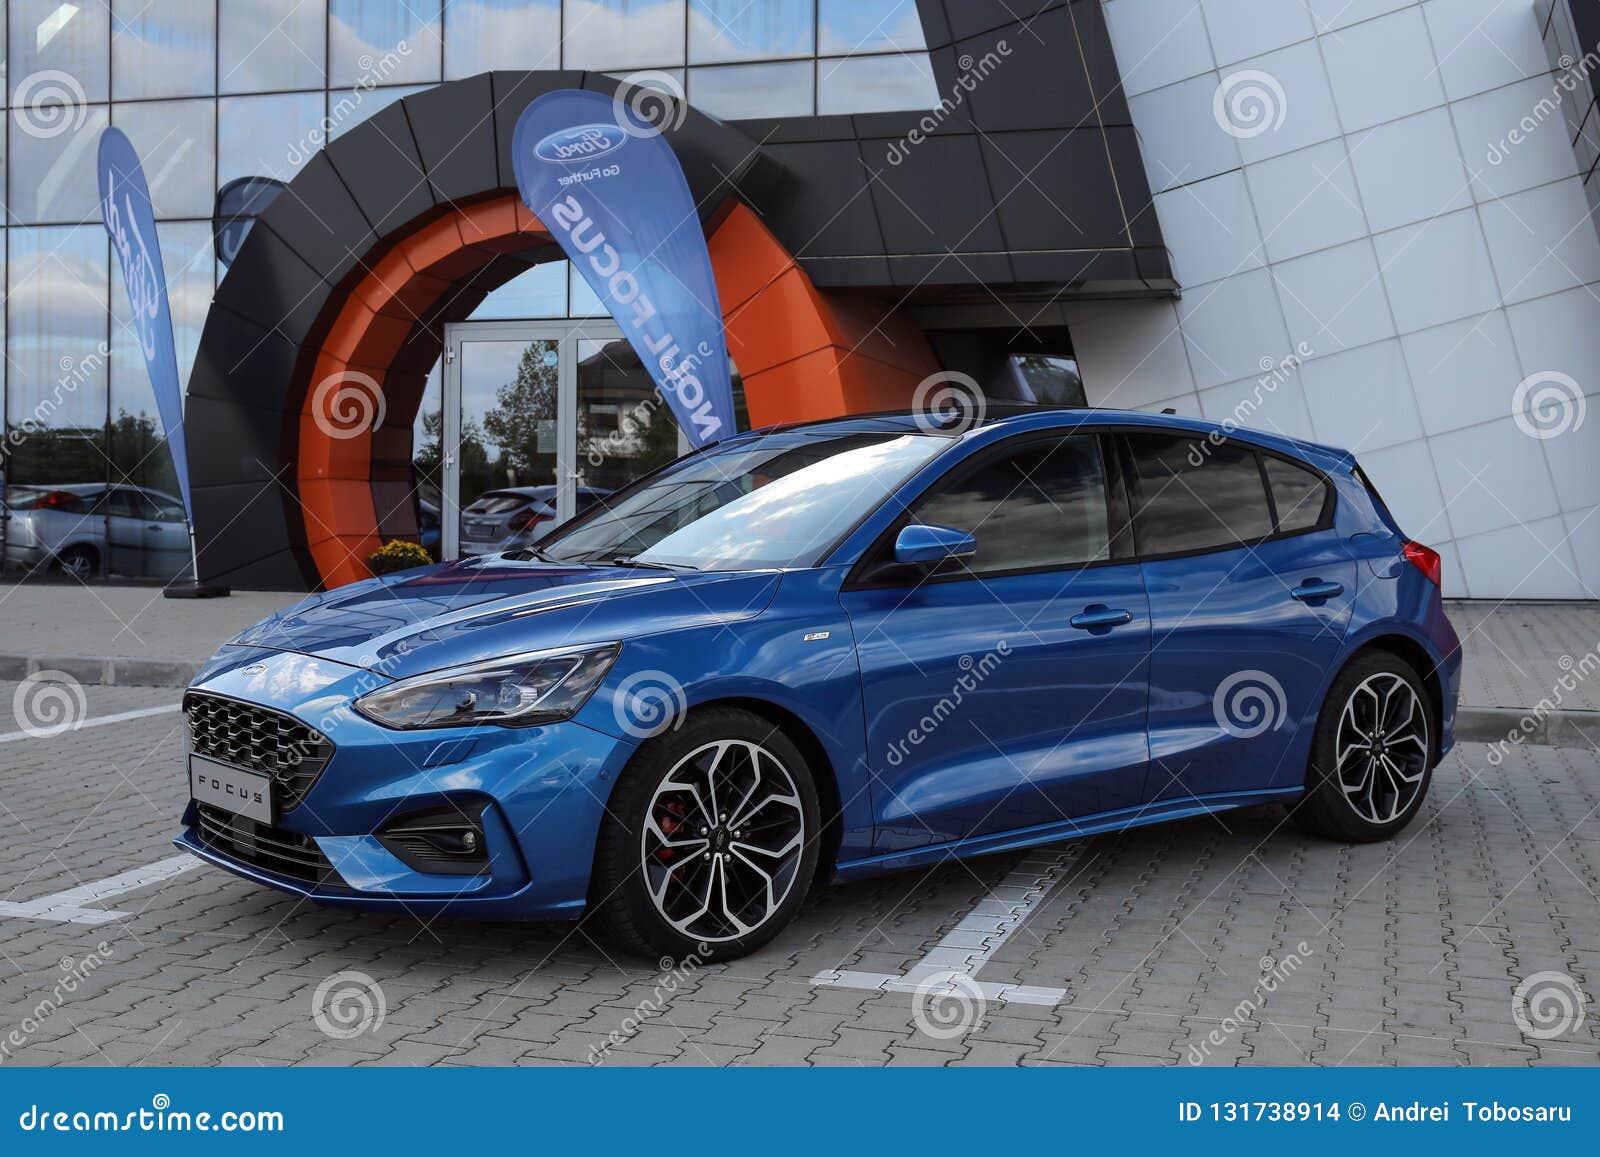 497 Ford Focus Blue Photos Free Royalty Free Stock Photos From Dreamstime